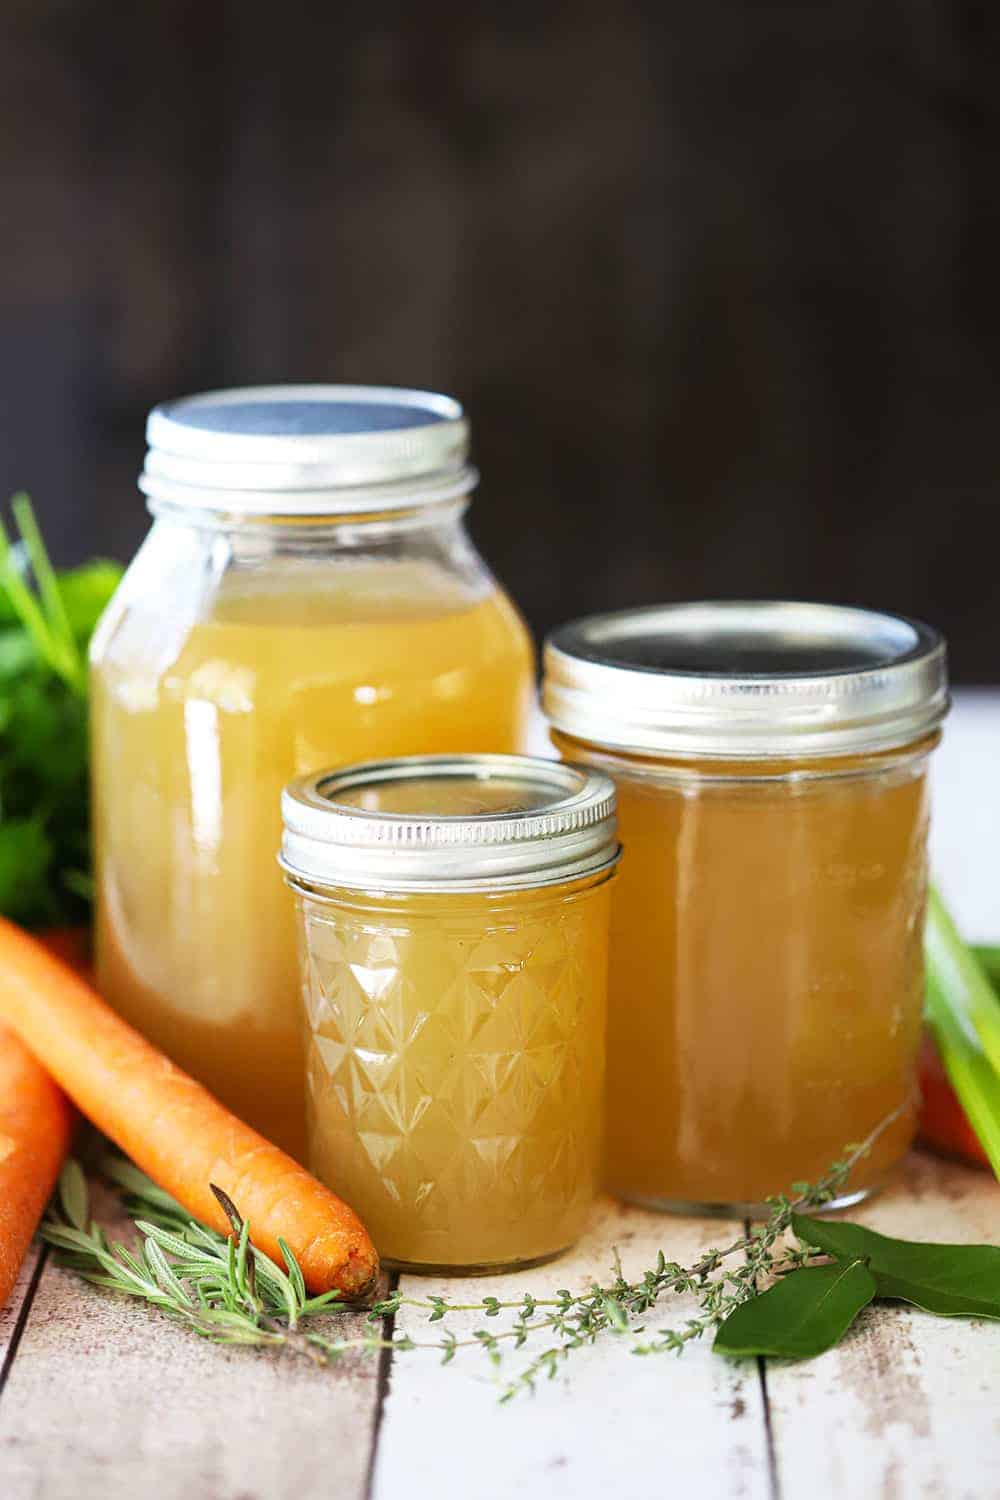 Three jars, ranging in size from small to large, filled with homemade chicken broth with loose carrots and herbs nearby. 